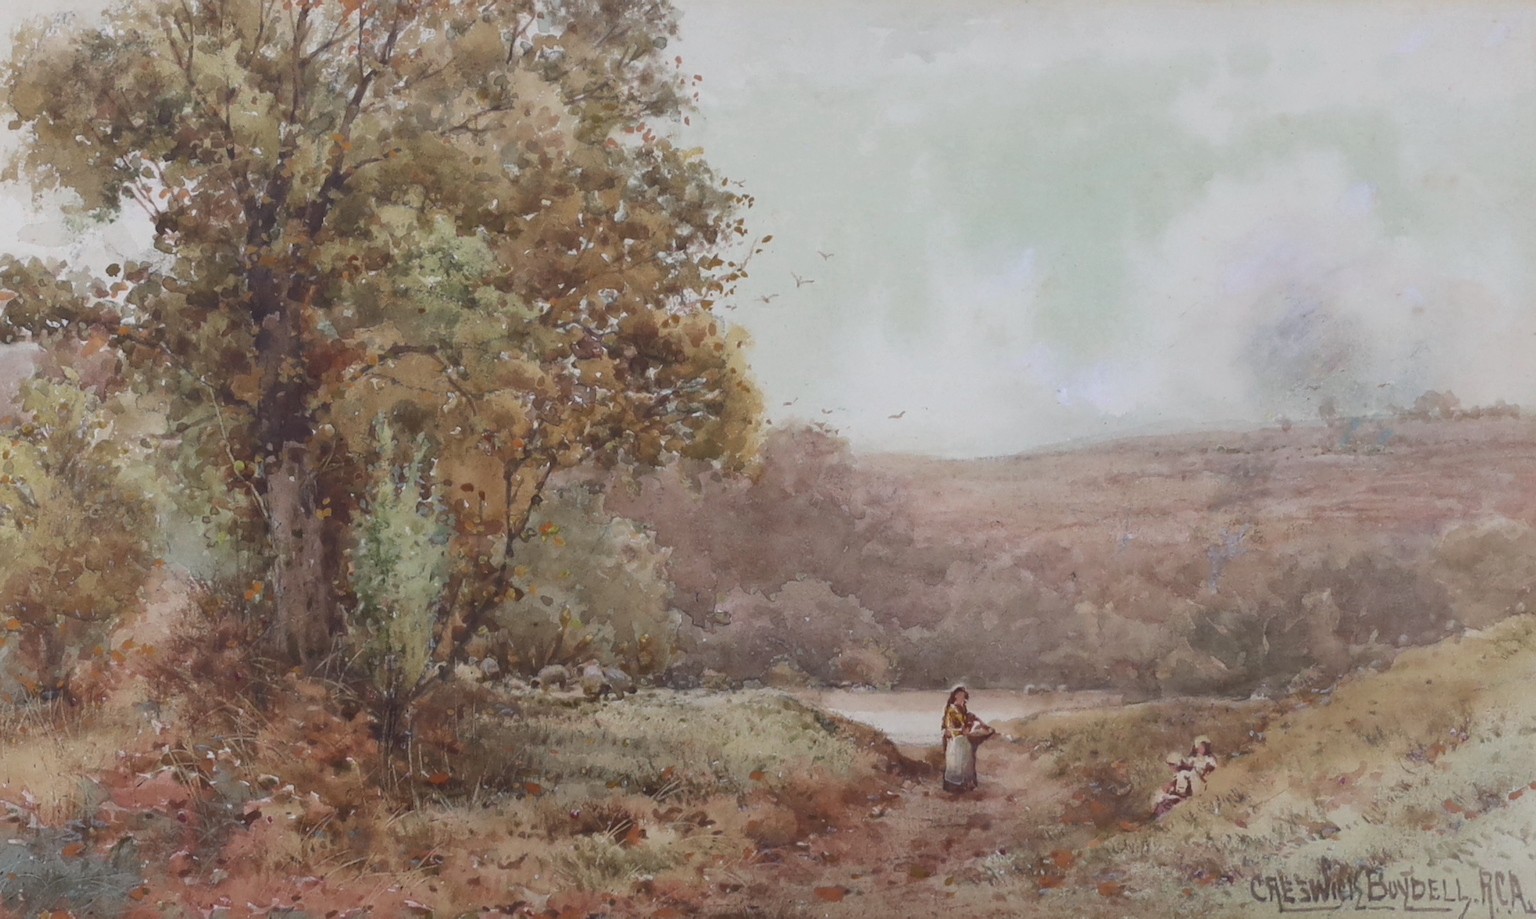 Creswick Boydell (Exh.1889-1916), watercolour, Figures on a country path, signed, 20 x 34cm